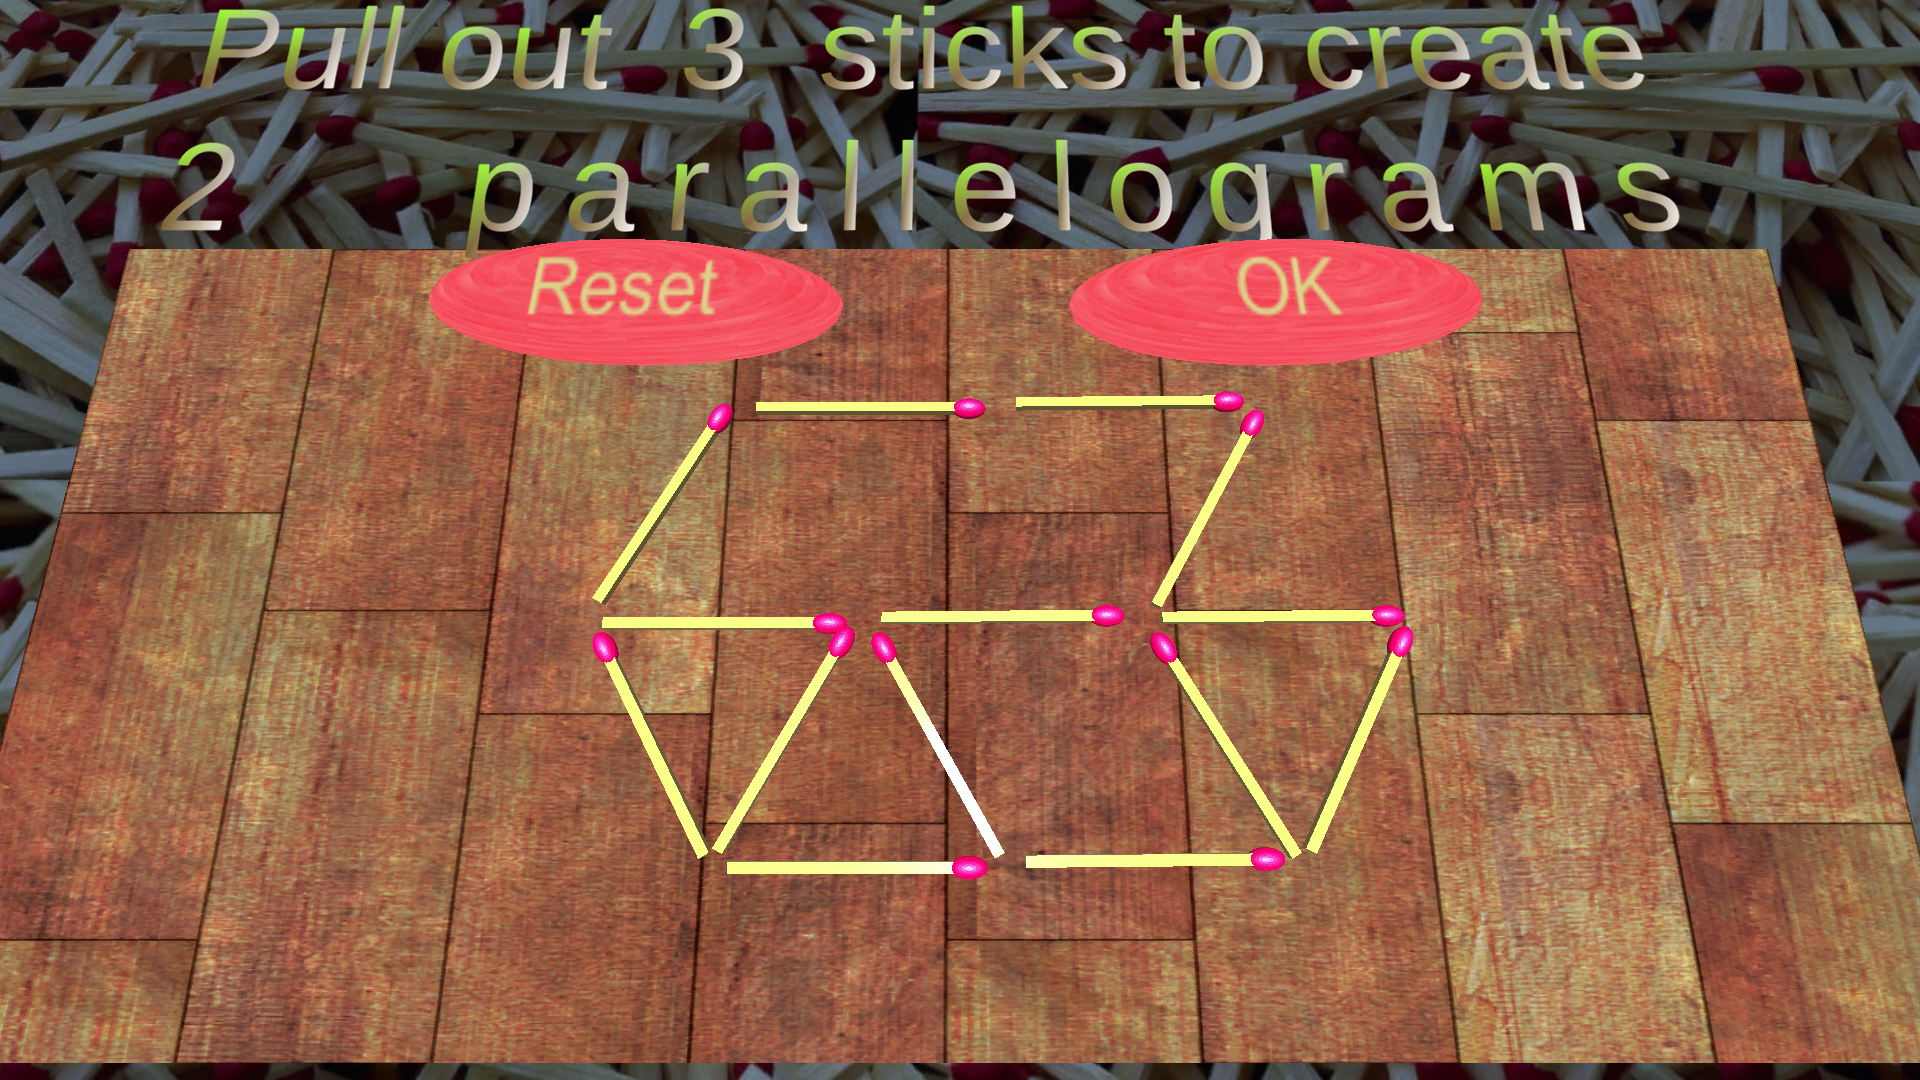 Simple Math 3D Games: Matches Equation